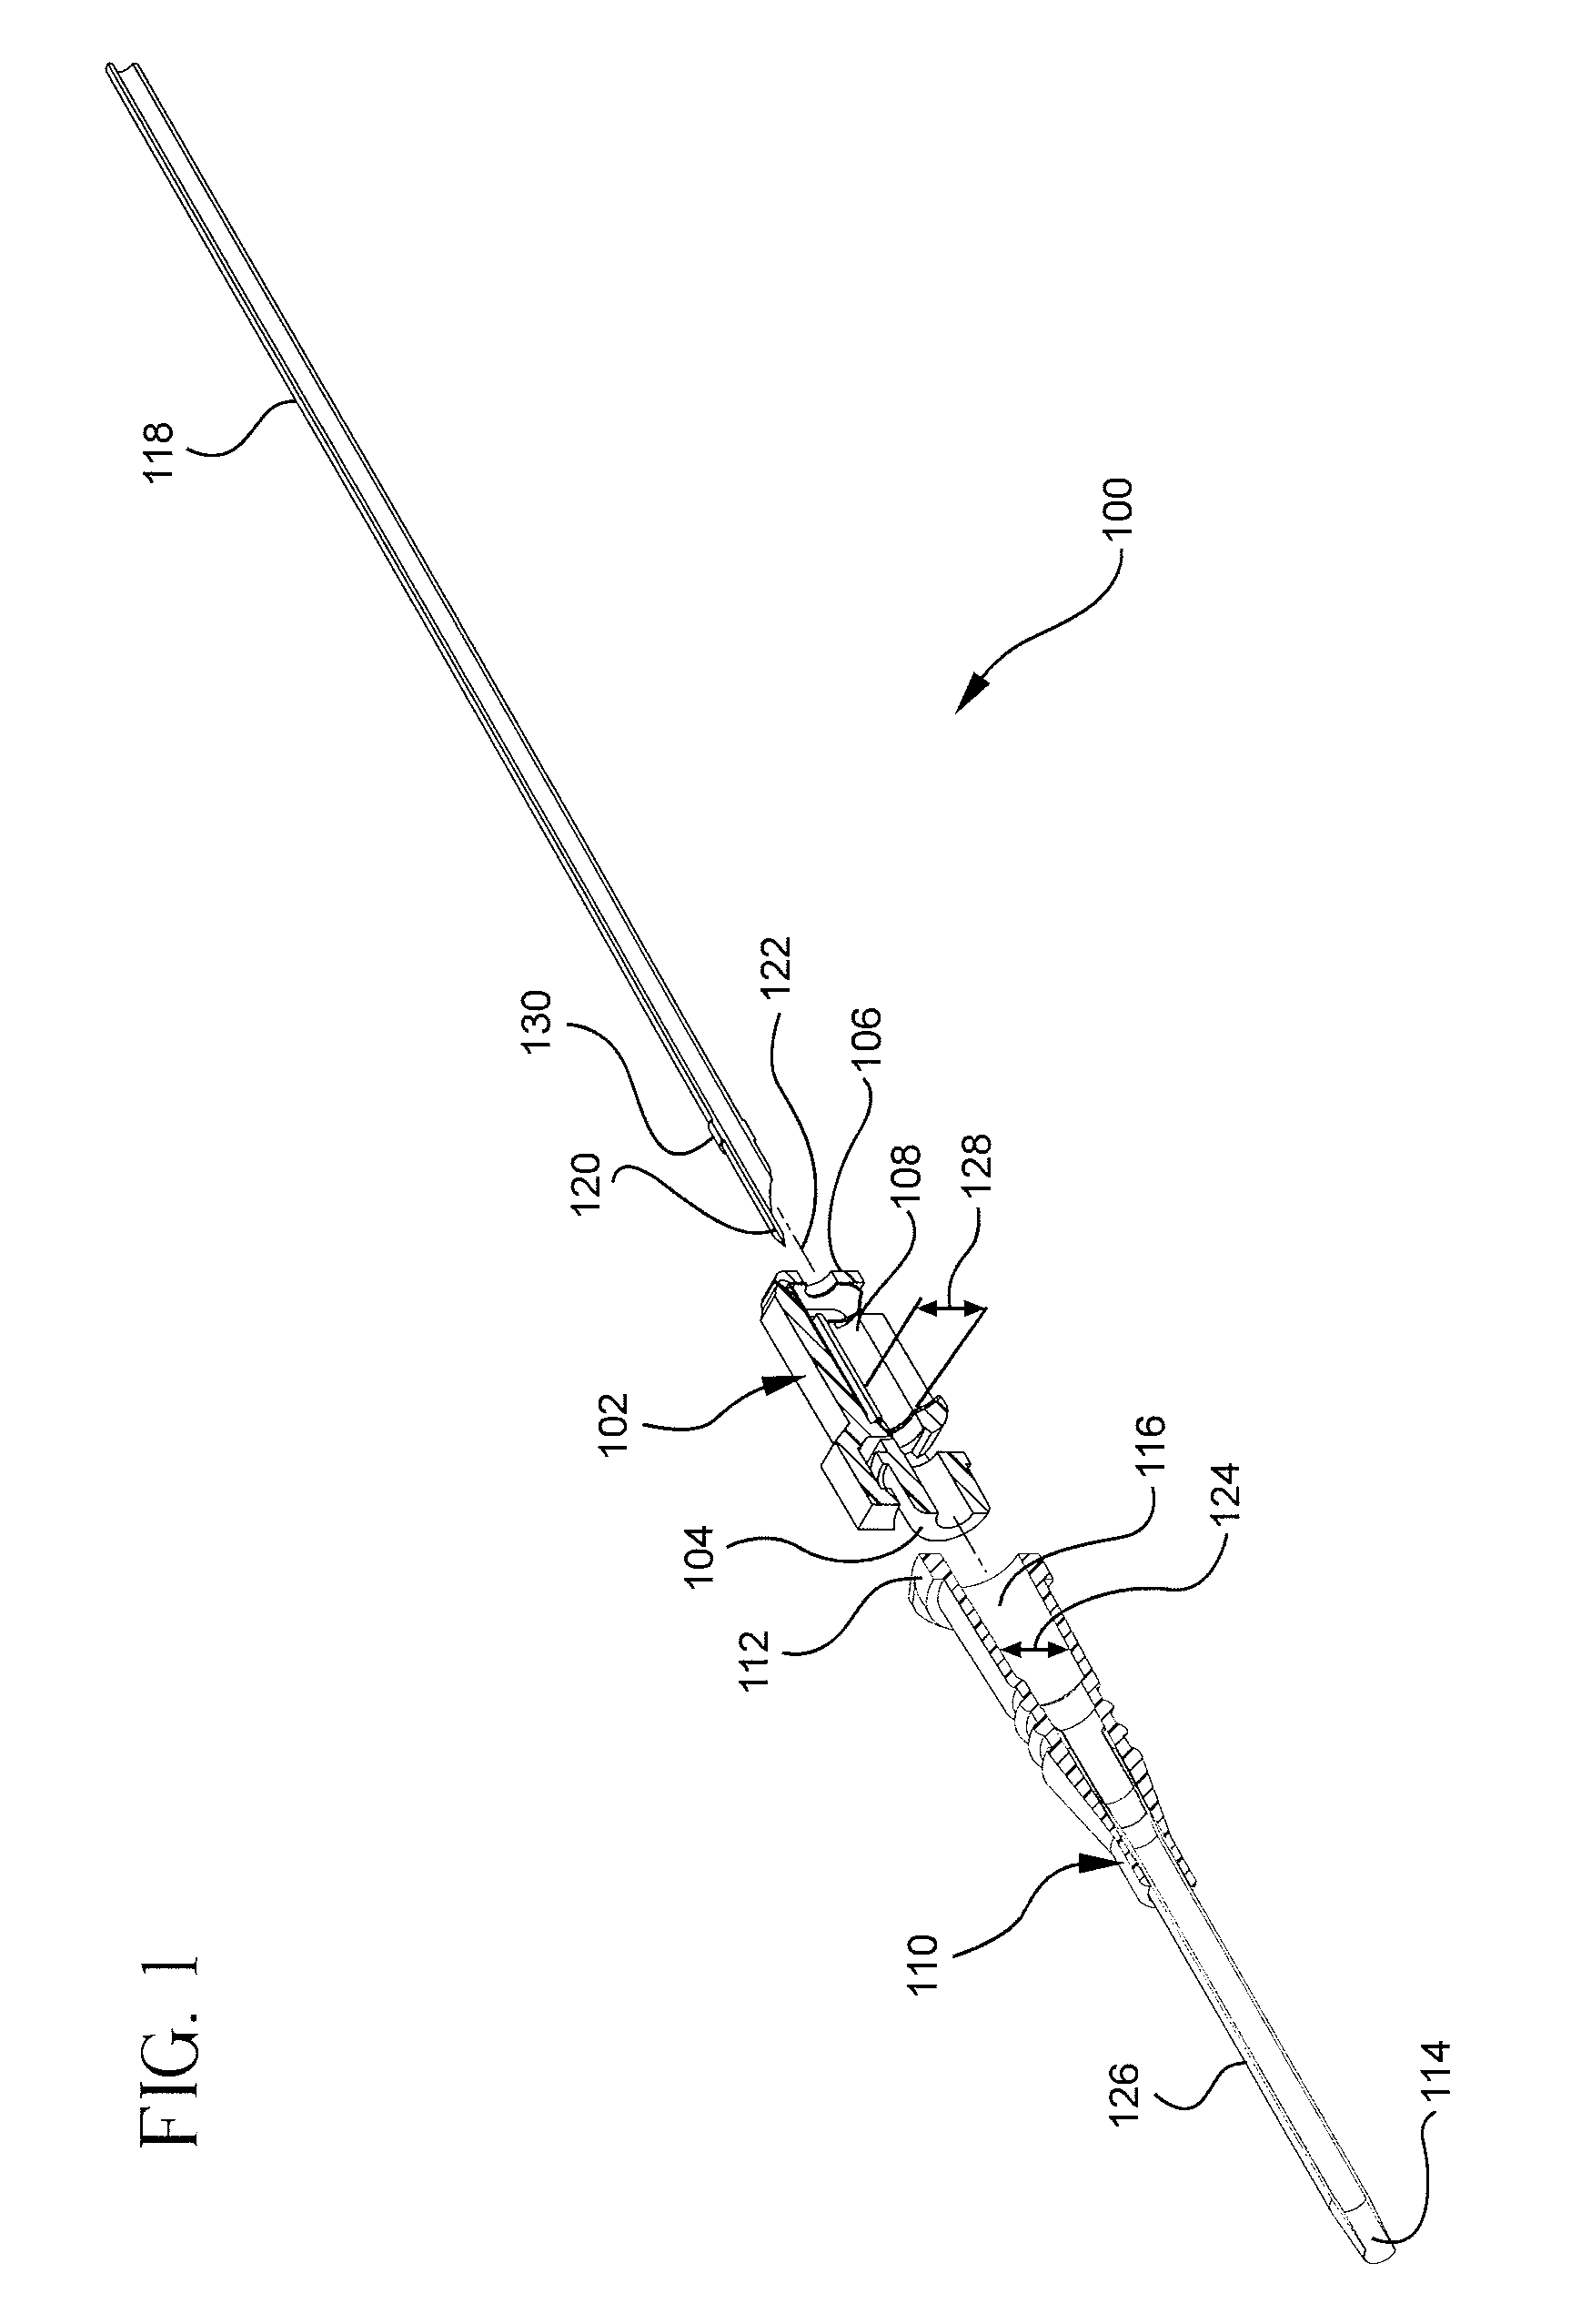 Catheter insertion device with automatic safety barrier